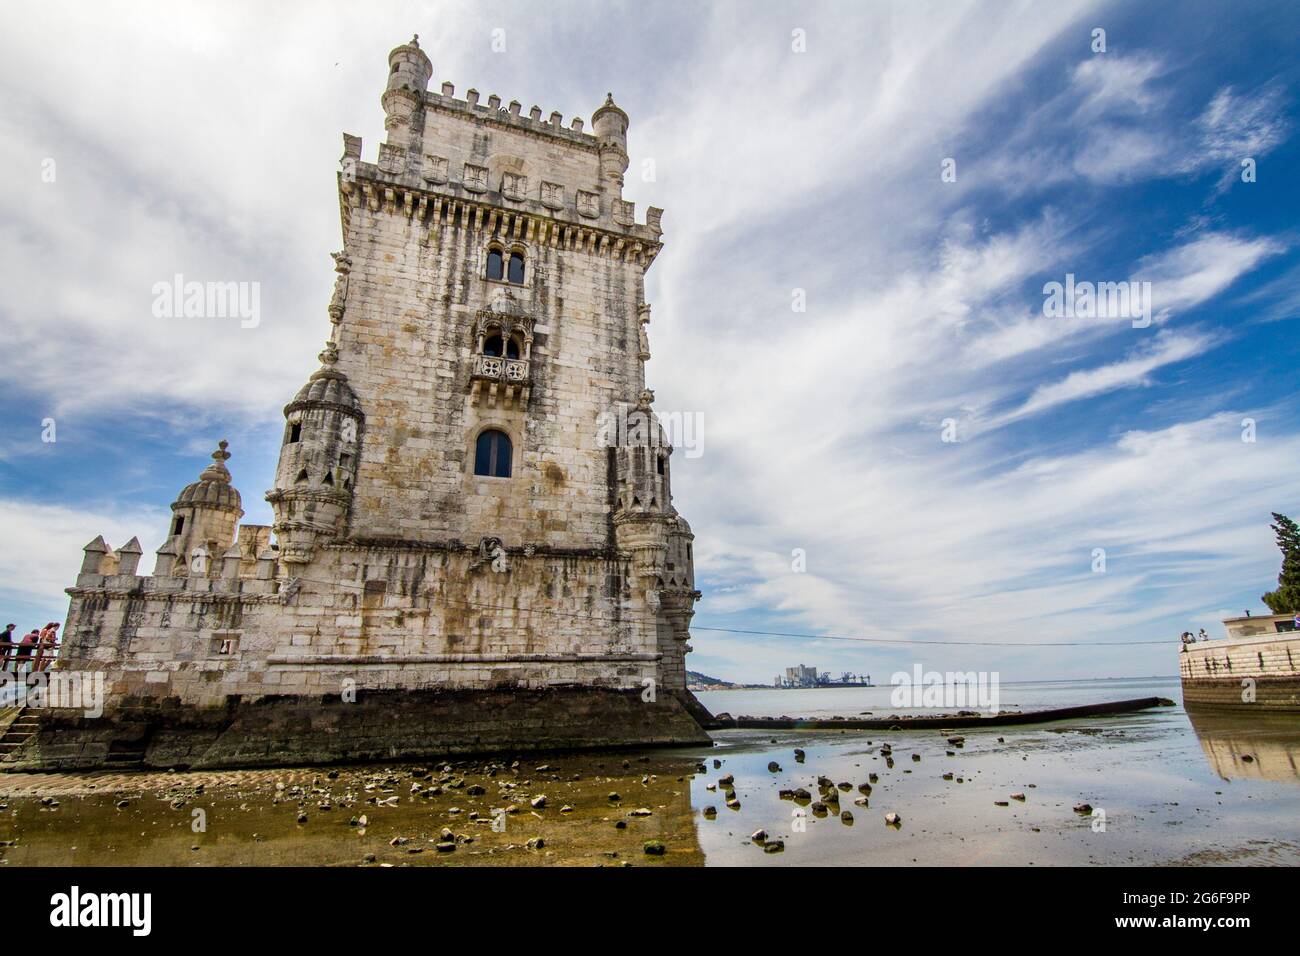 View of the famous landmark, Tower of Belem, located in Lisbon, Portugal. Stock Photo